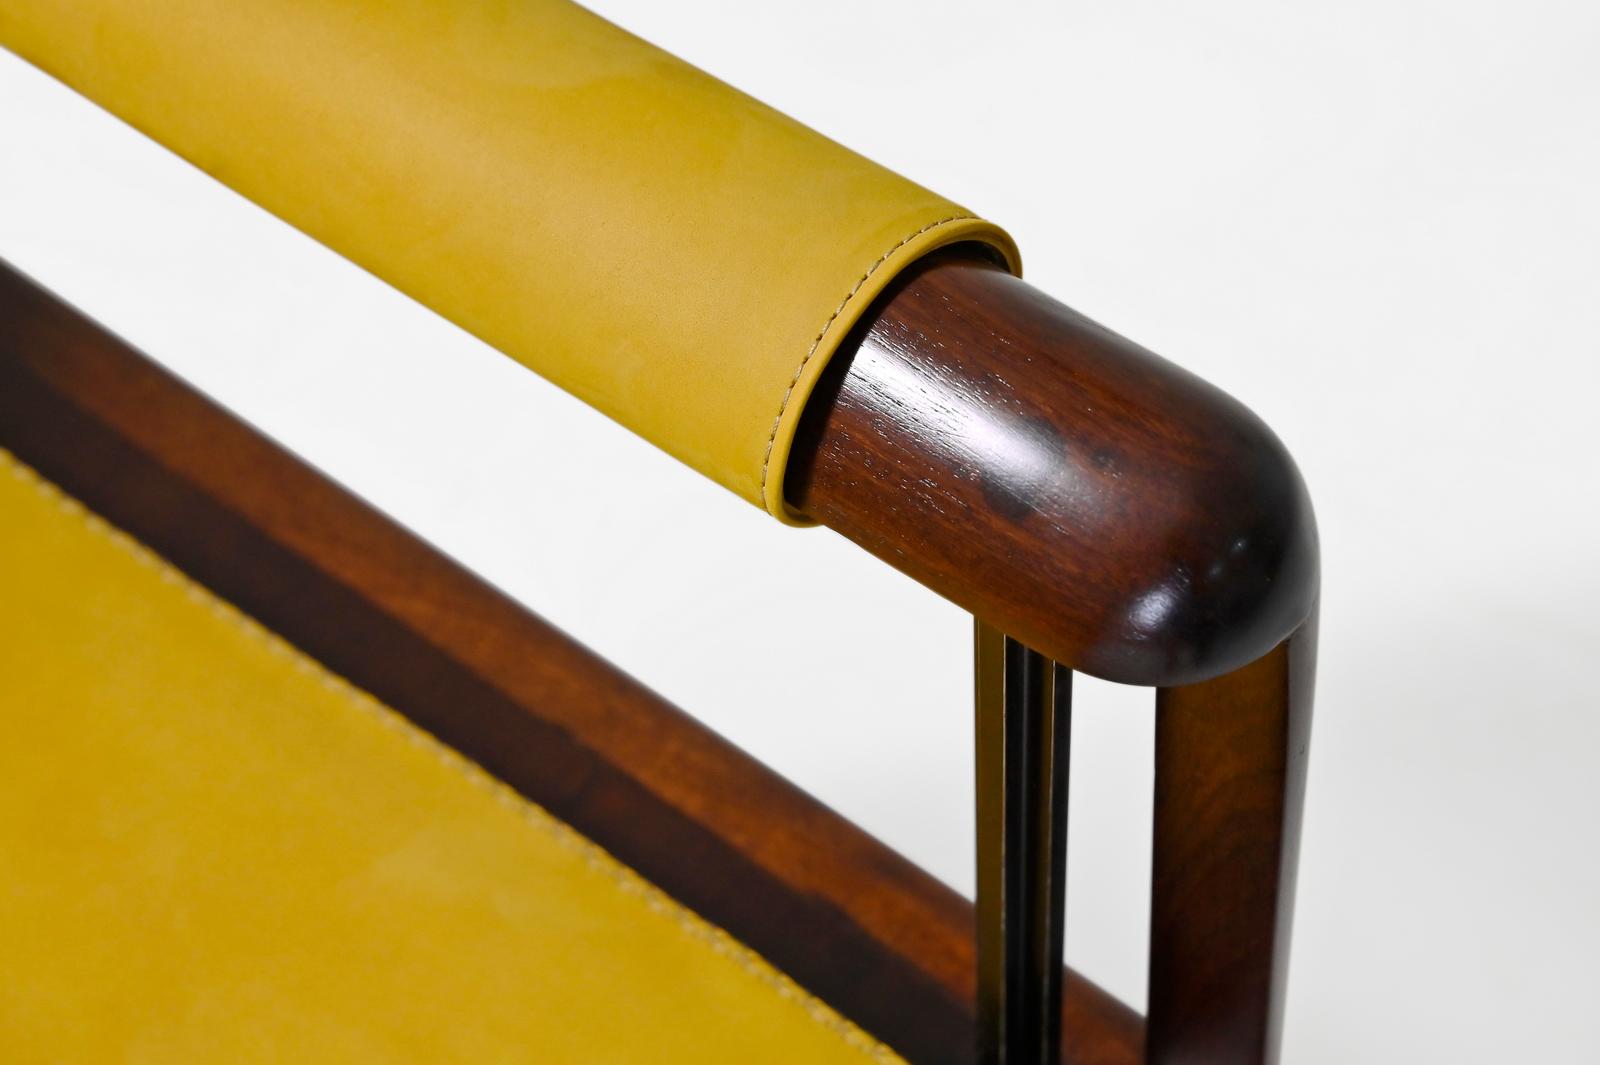 Brass Bespoke Chair Reclaimed Hardwood Handstitched Leather Seating, P. Tendercool For Sale